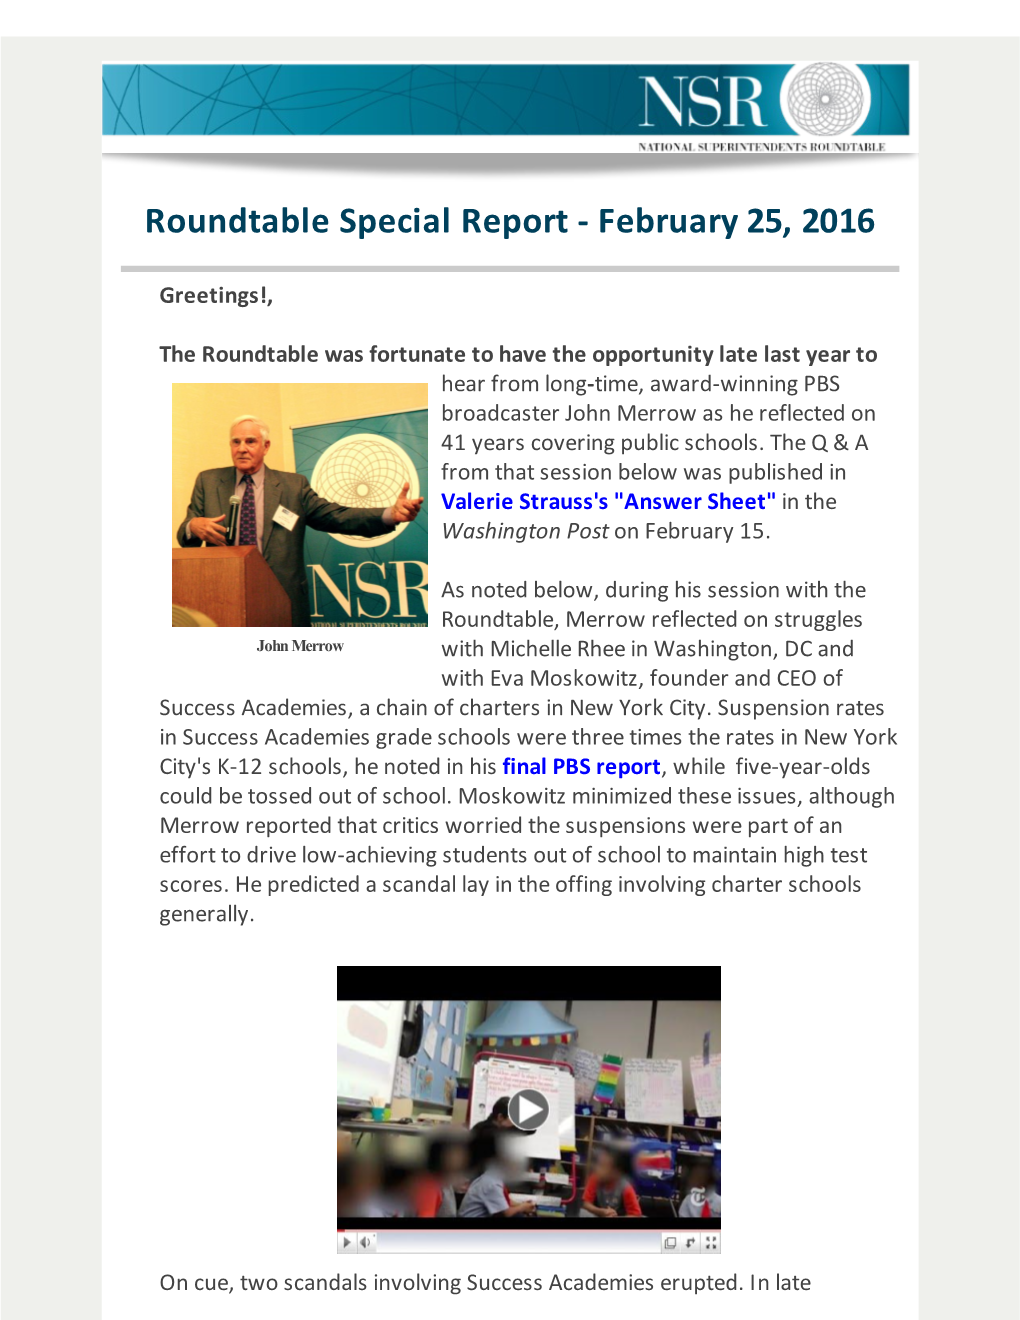 Roundtable Special Report - February 25, 2016